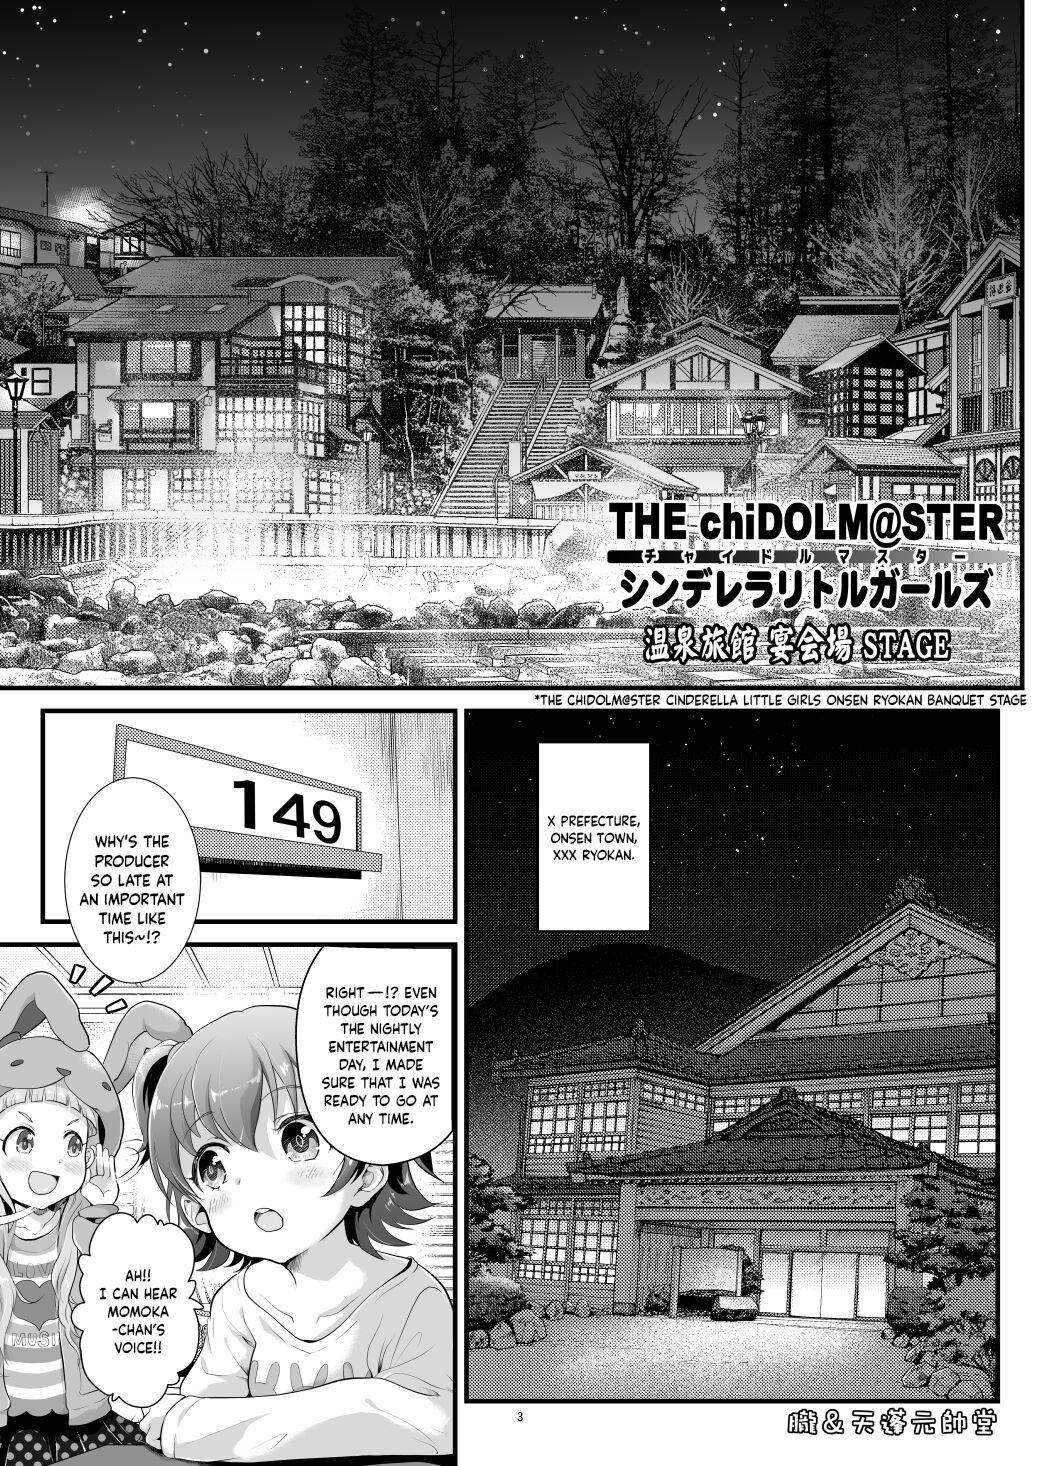 Behind THE chiDOLM@STER Cinderella Little Girls - The idolmaster Workout - Page 2